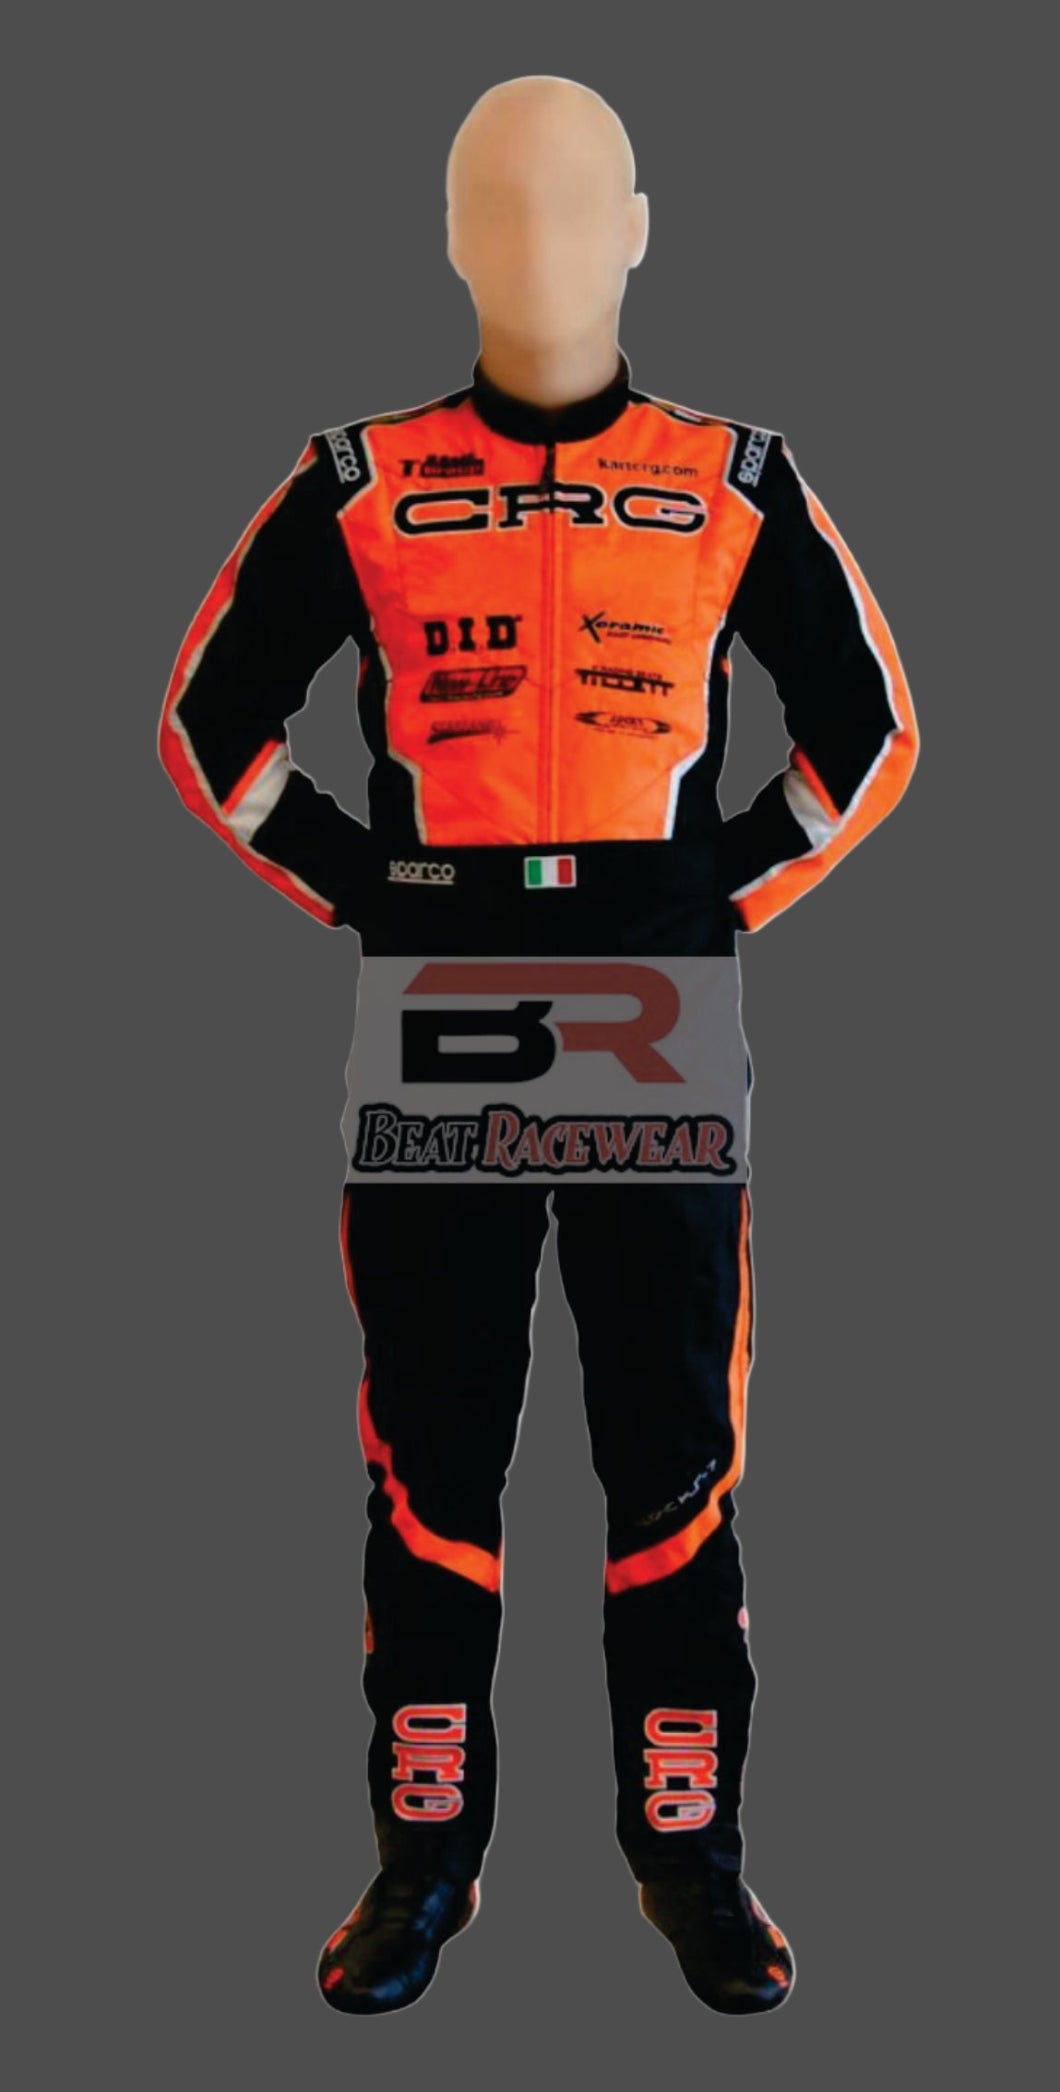 CRG Sparco go kart 2020 suit in all sizes